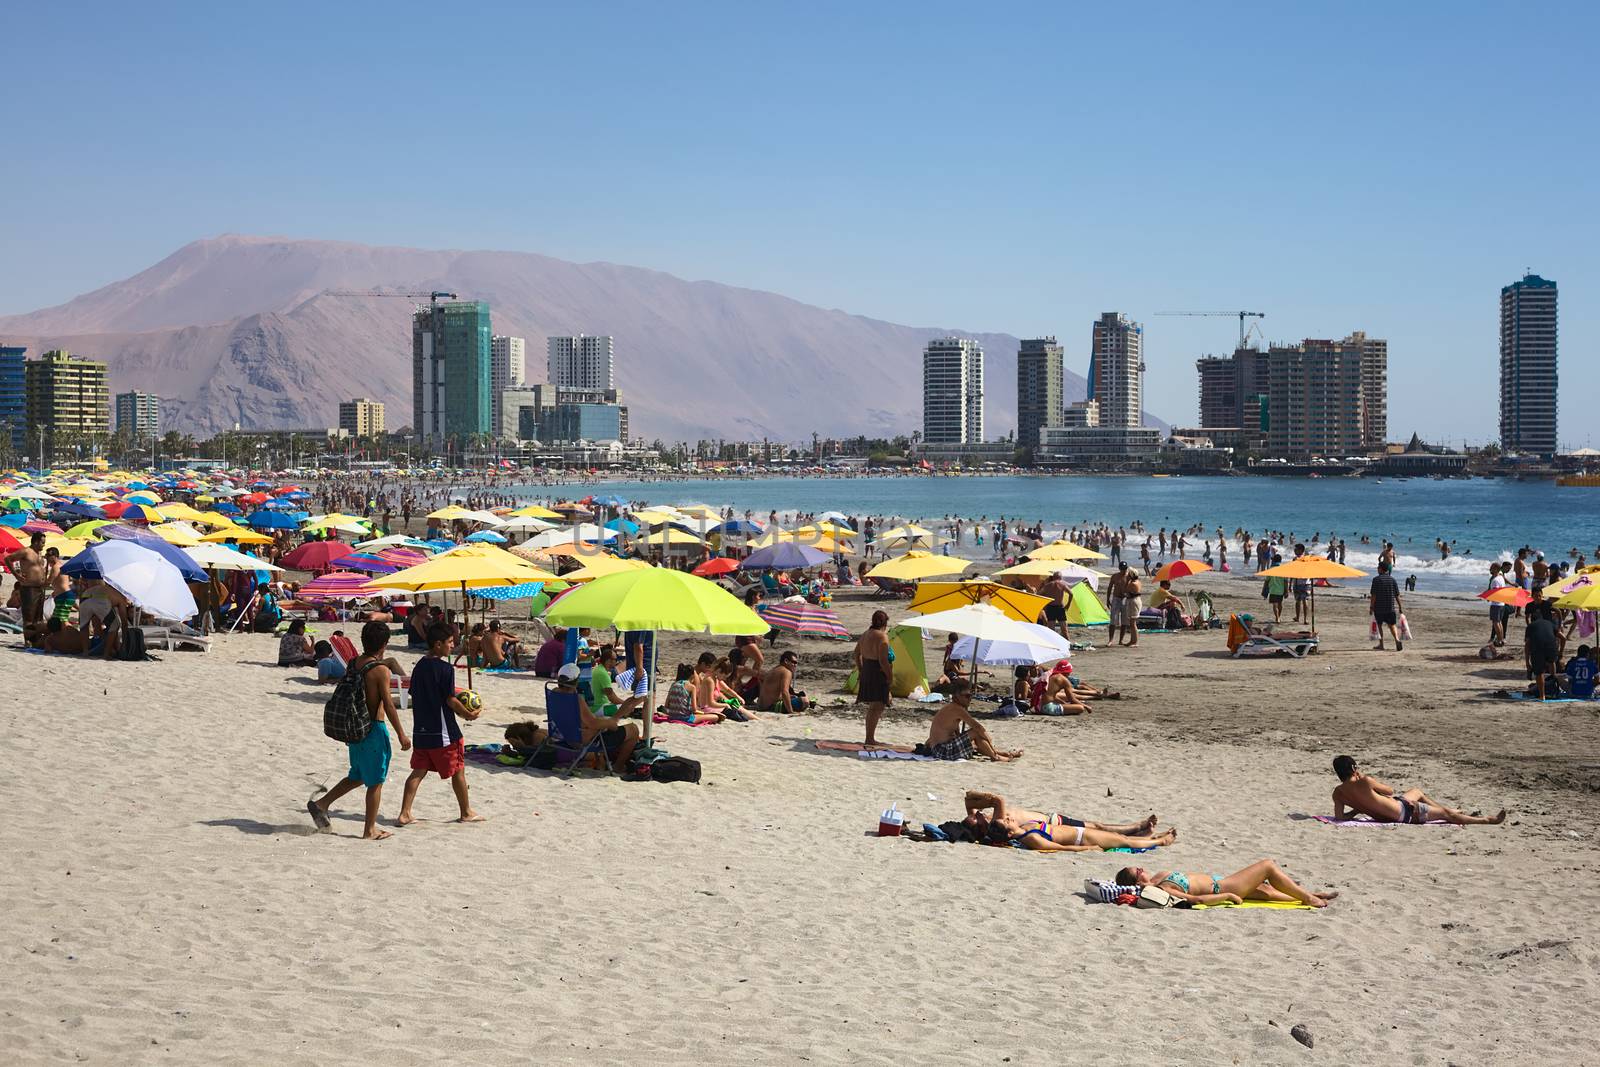 IQUIQUE, CHILE - JANUARY 23, 2015: Unidentified people enjoying the summer on the crowded Cavancha beach on January 23, 2015 in Iquique, Chile. Iquique is a popular beach town and free port city in Northern Chile.  